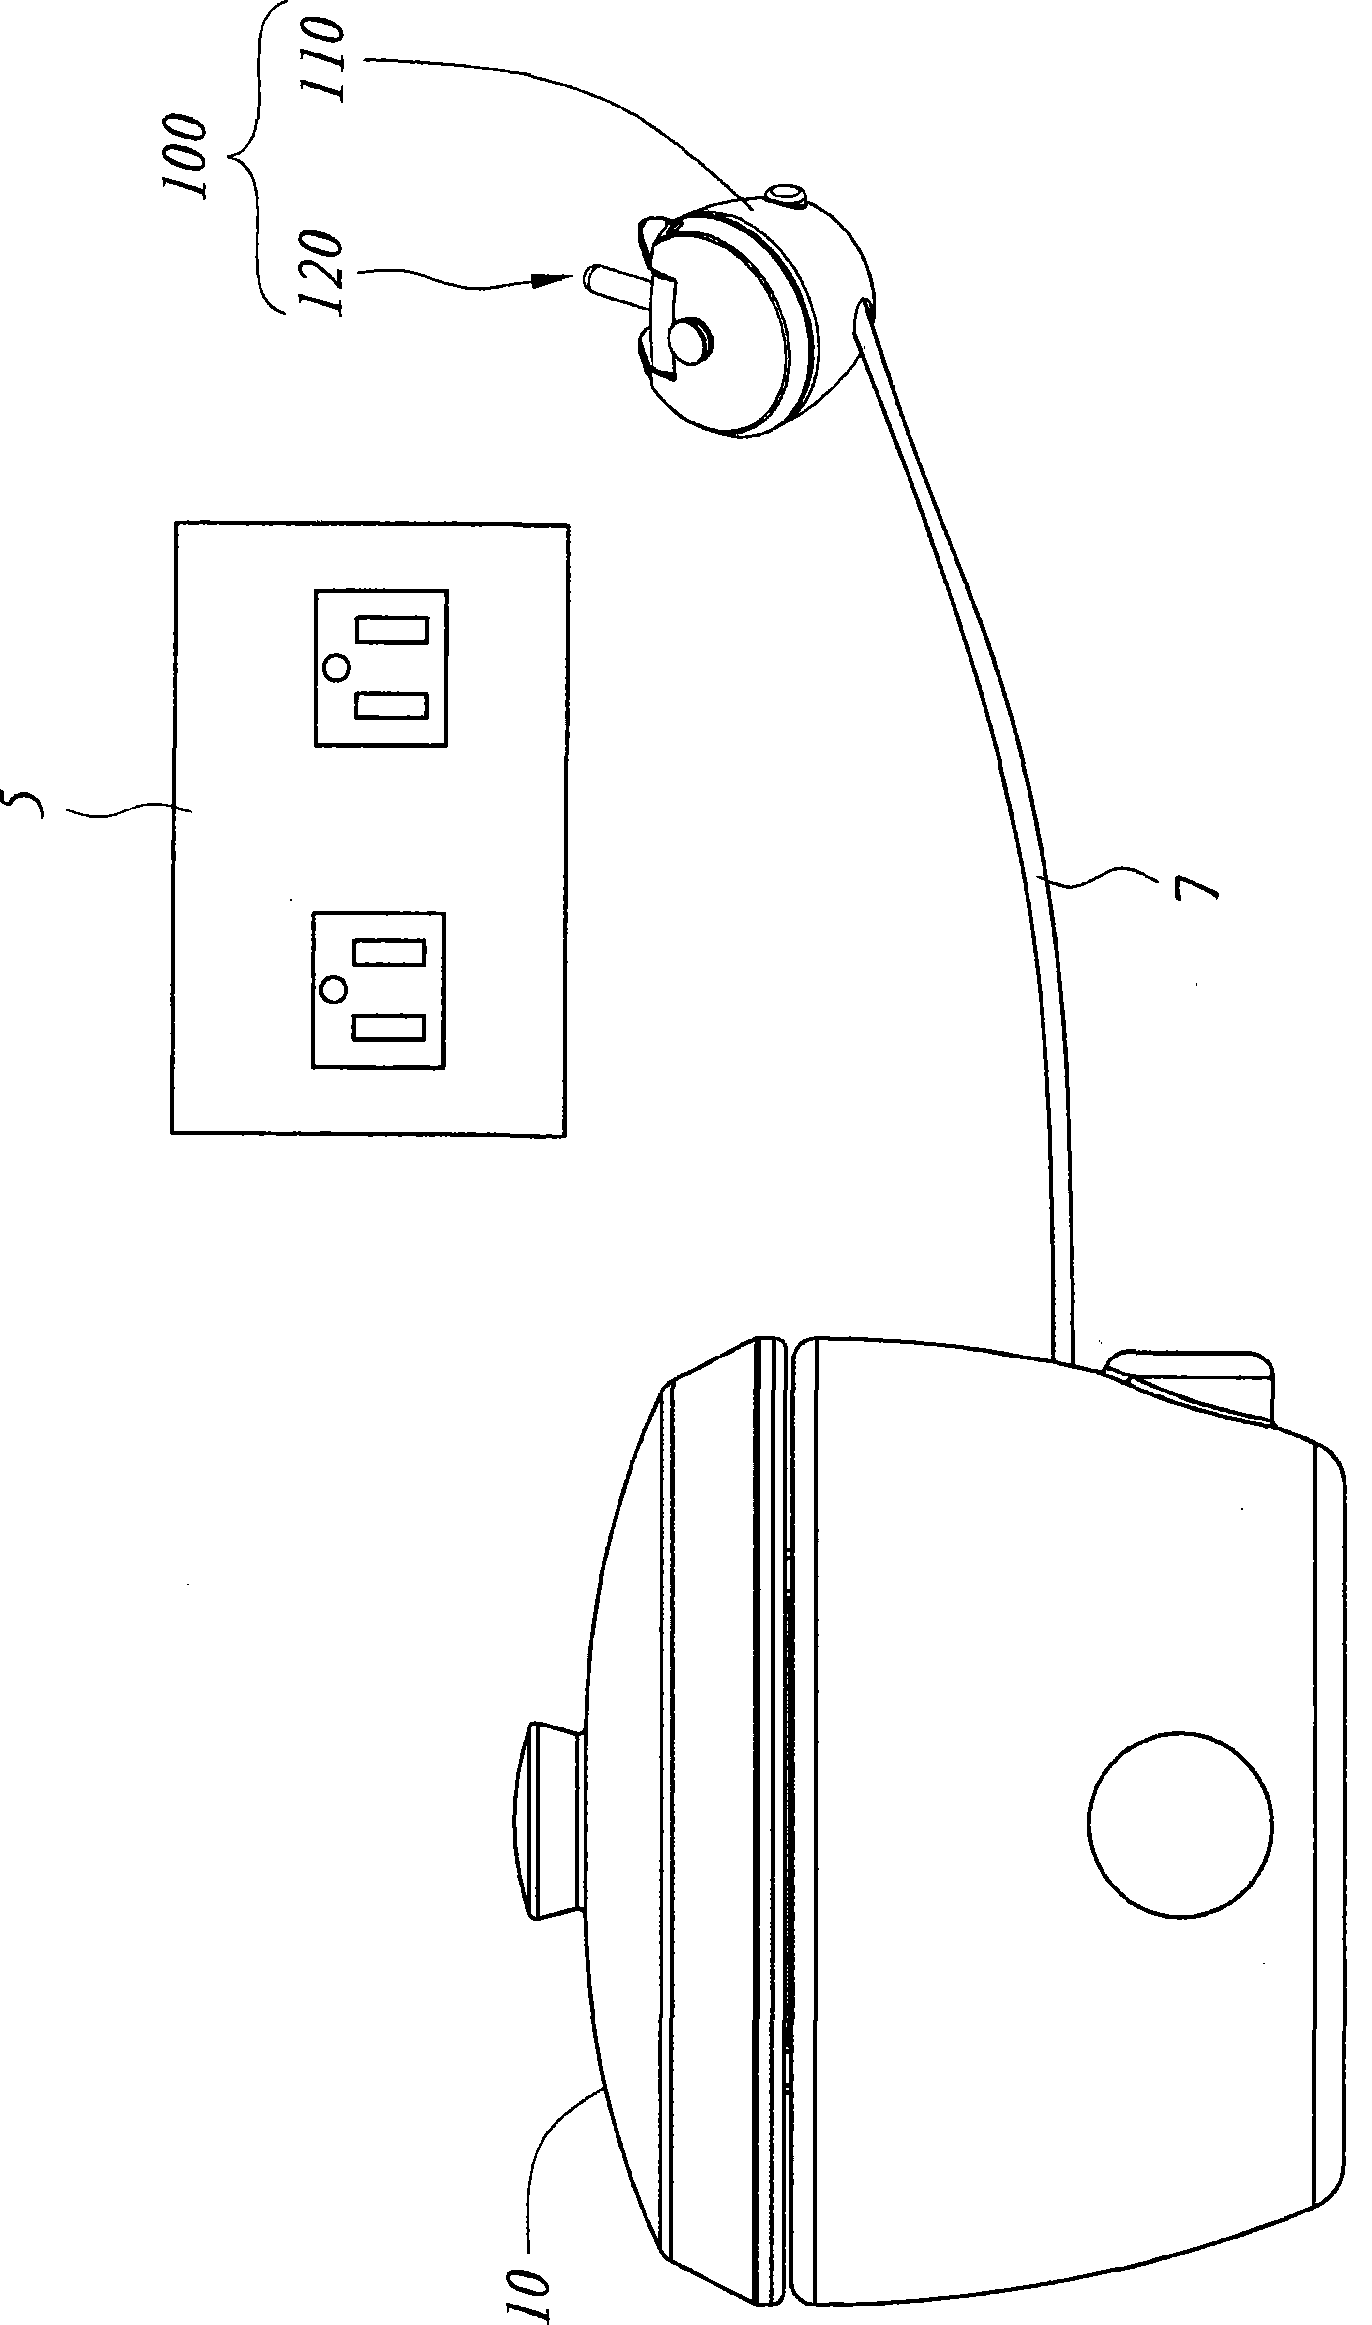 Molded plug and electric appliances applying the same